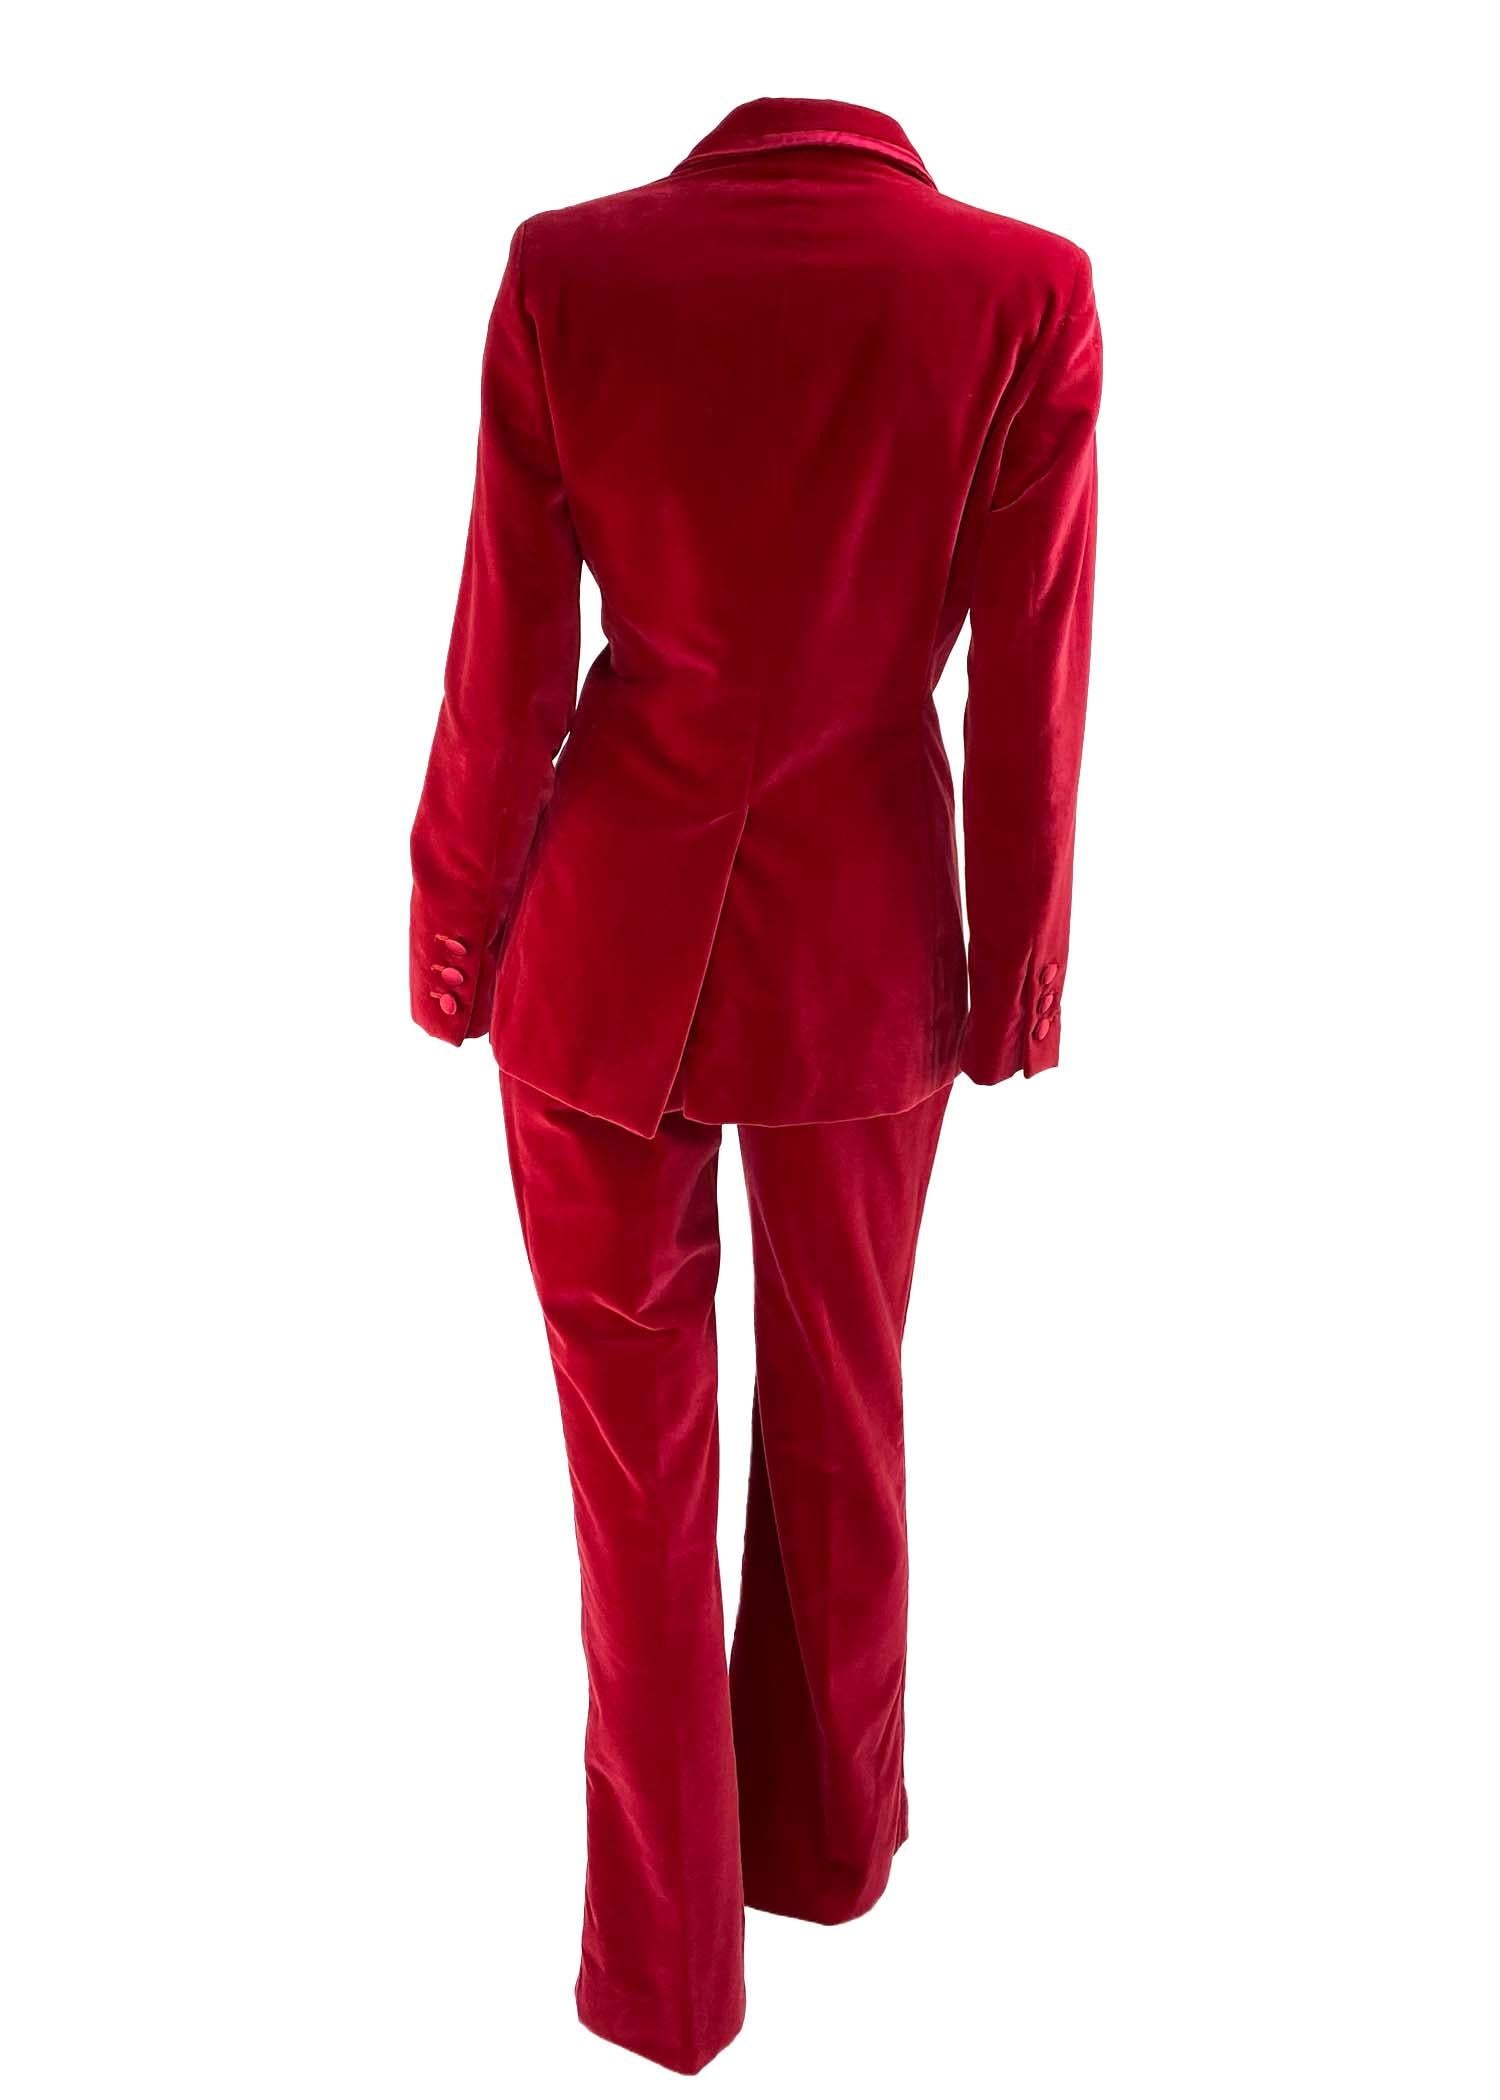 Women's F/W 1996 Gucci by Tom Ford Red Velvet Tuxedo Documented Museum Piece